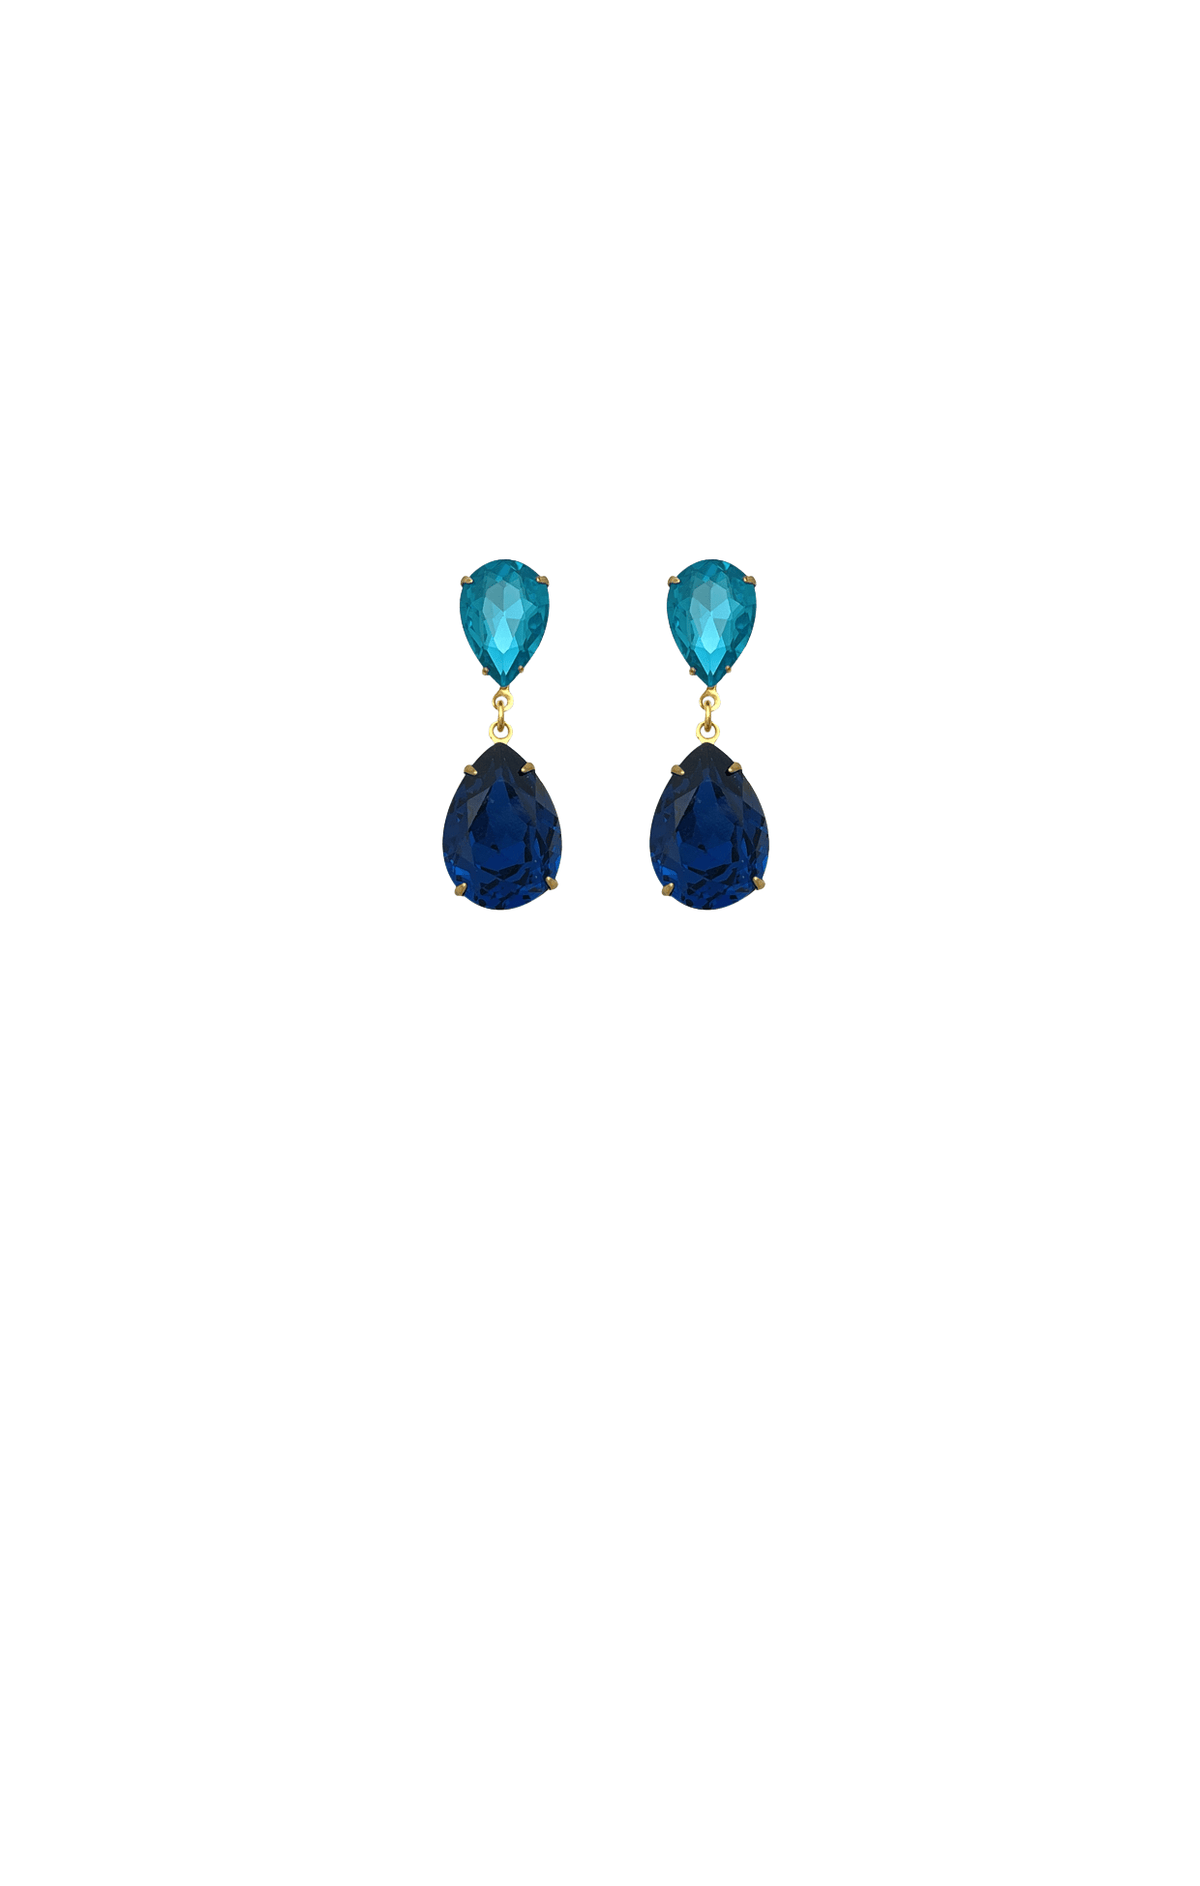 ACCESSORIES Earrings OS / BLUE BRIAR DROP EARRING IN AQUA AND NAVY